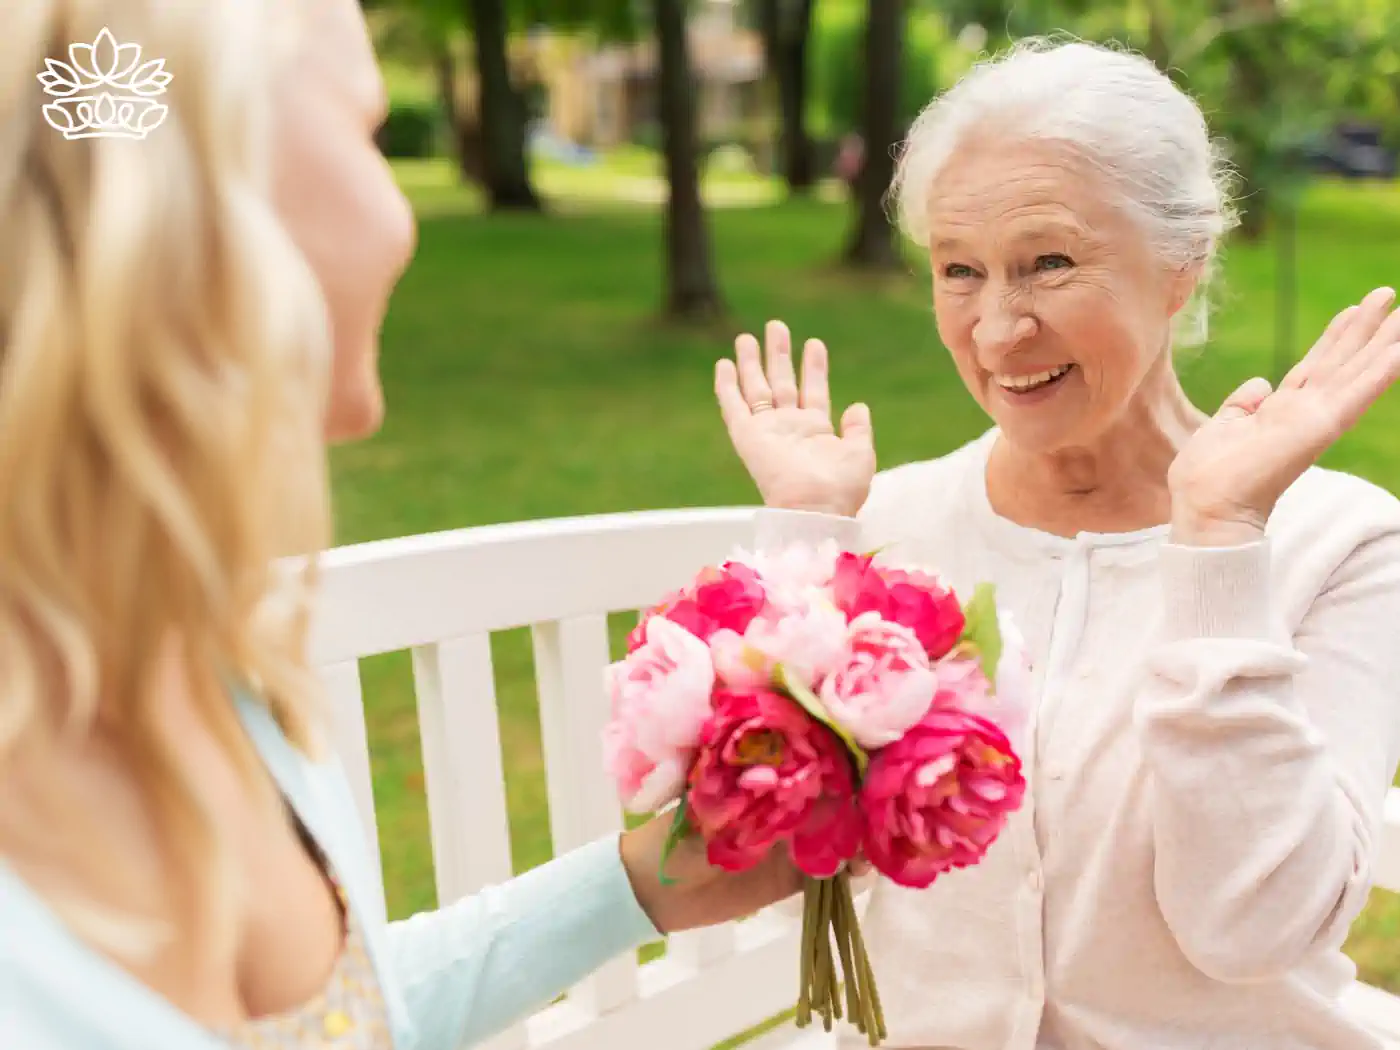 Joyful elderly woman receiving a bouquet of pink peonies from a younger woman on a park bench, expressing happiness and surprise. Fabulous Flowers and Gifts - Thank You Flowers. Delivered with Heart.